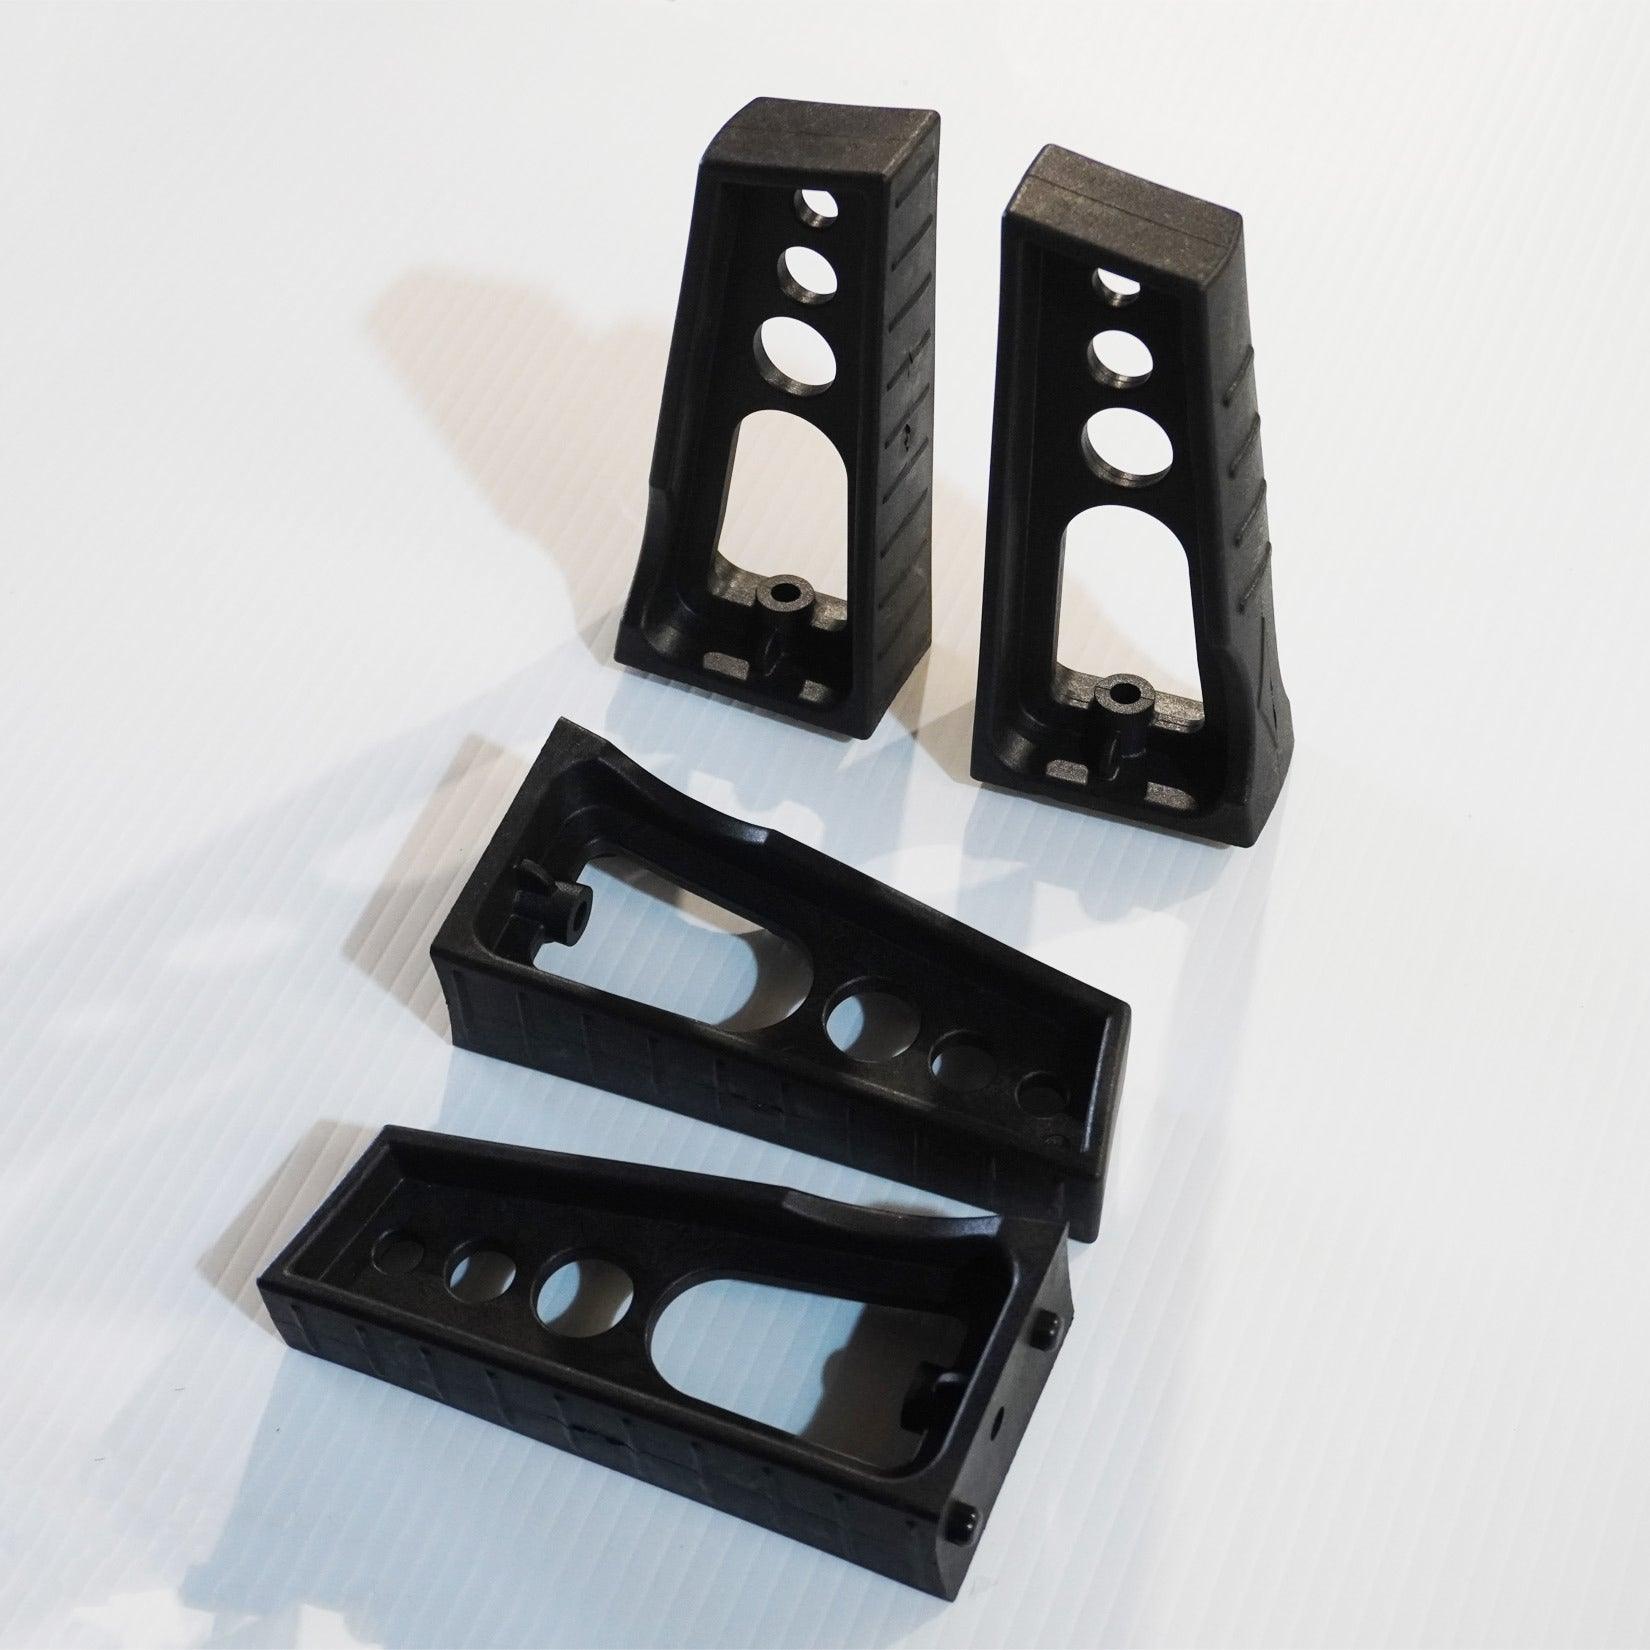 PLASTIC LOAD STOPS T-TRACK (2 PAIRS) FOR CROSS BARS UNIVERSAL FIT IN BLACK - Storm Xccessories2